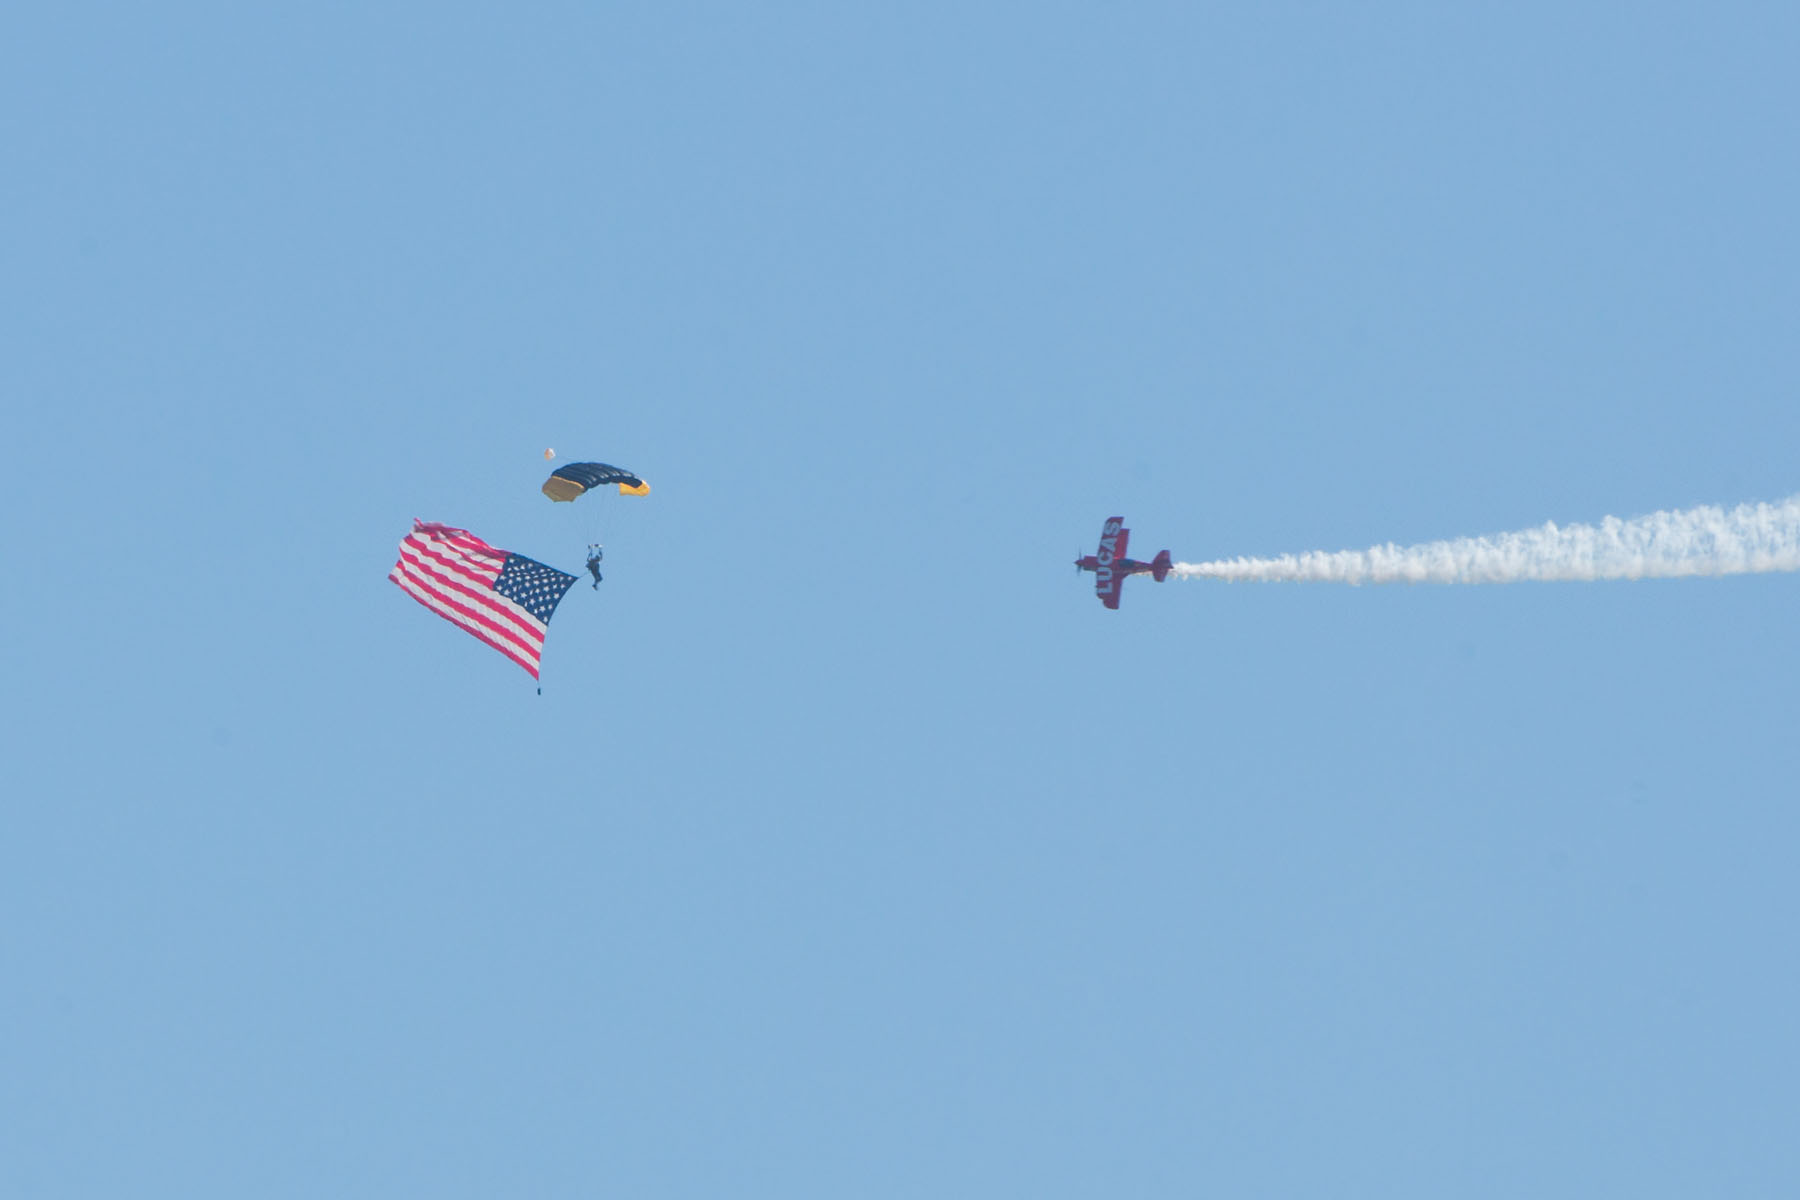 Skydiver brings in the flag, Sioux Falls Air Show.  Lucas Oil stunt plane escorts him down.  Click for next photo.